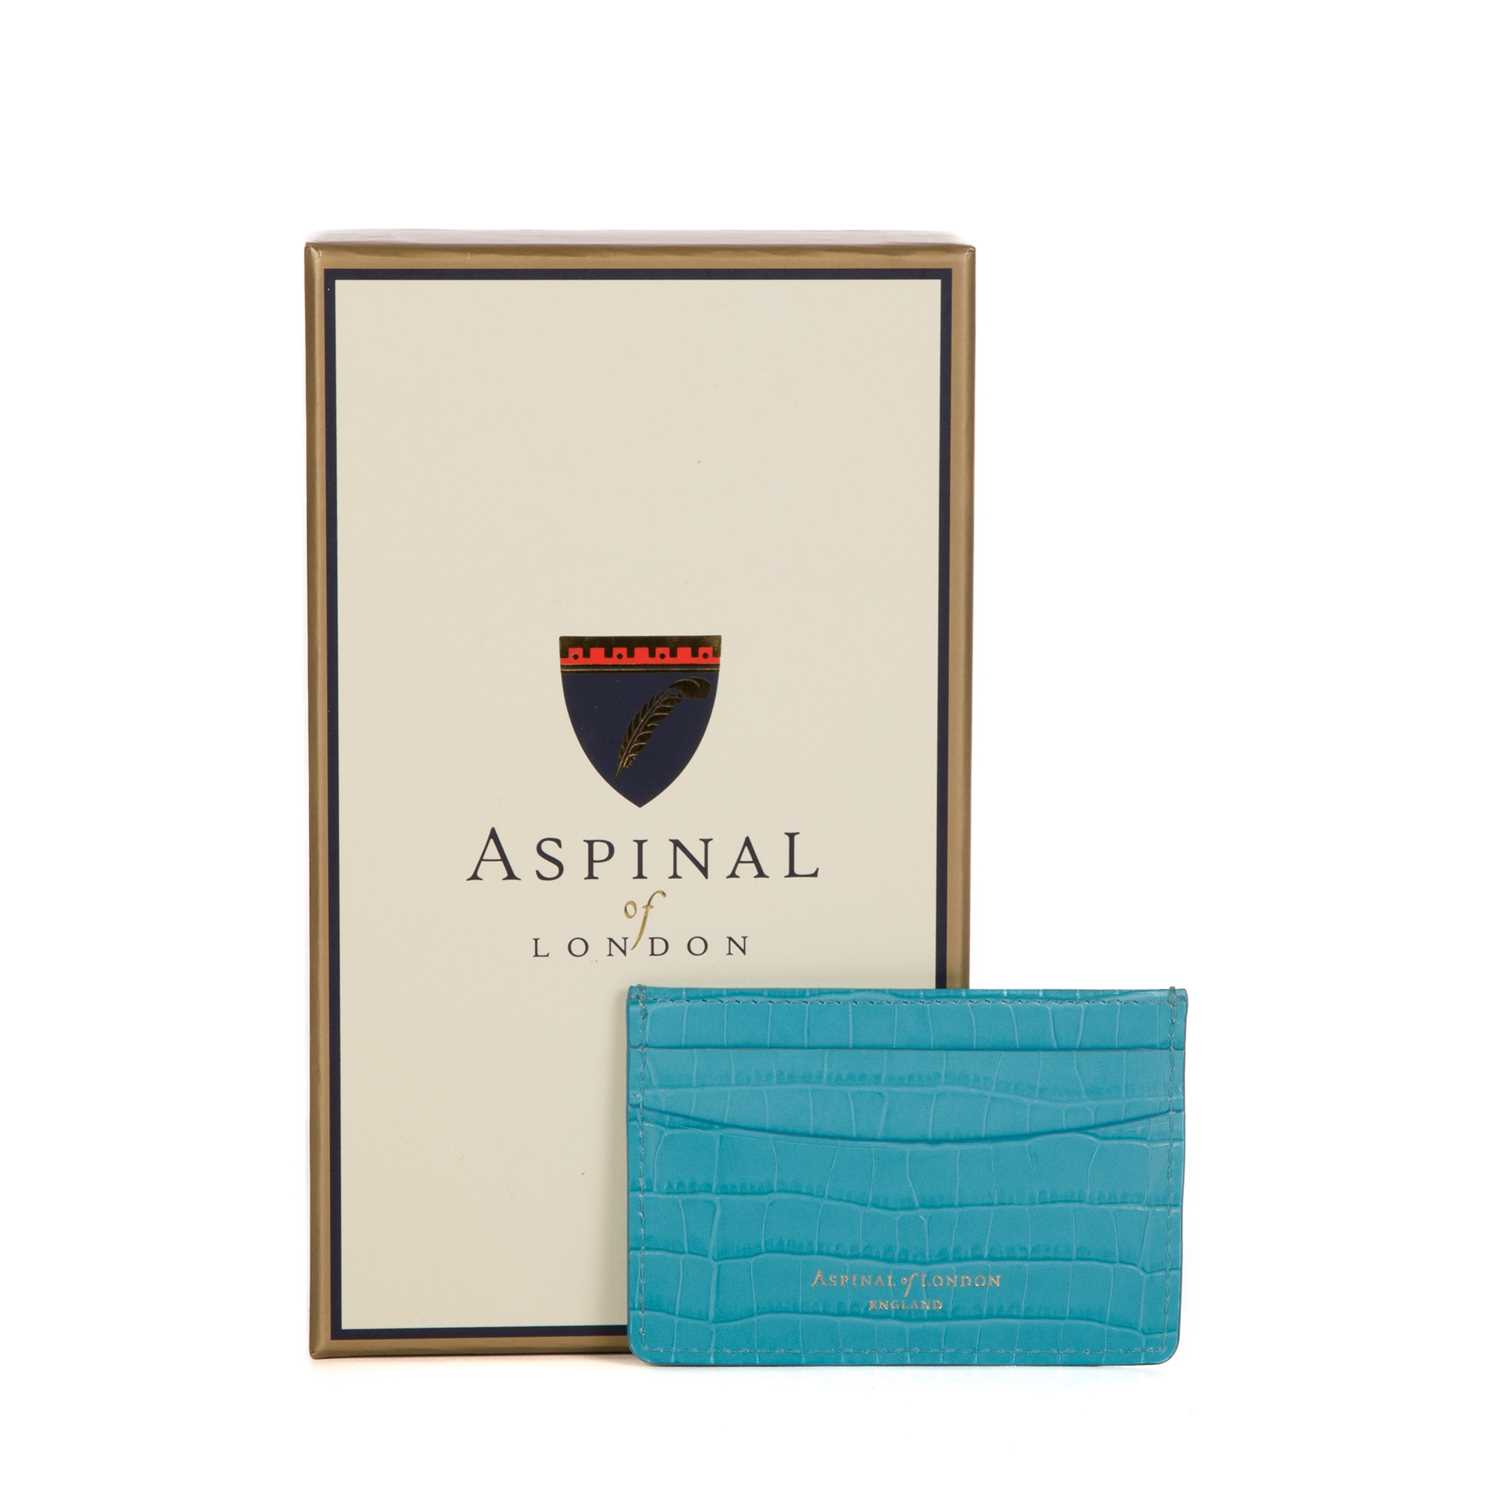 Aspinal of London, a croc-embossed leather card holder, crafted from turquoise blue crocodile - Image 3 of 3